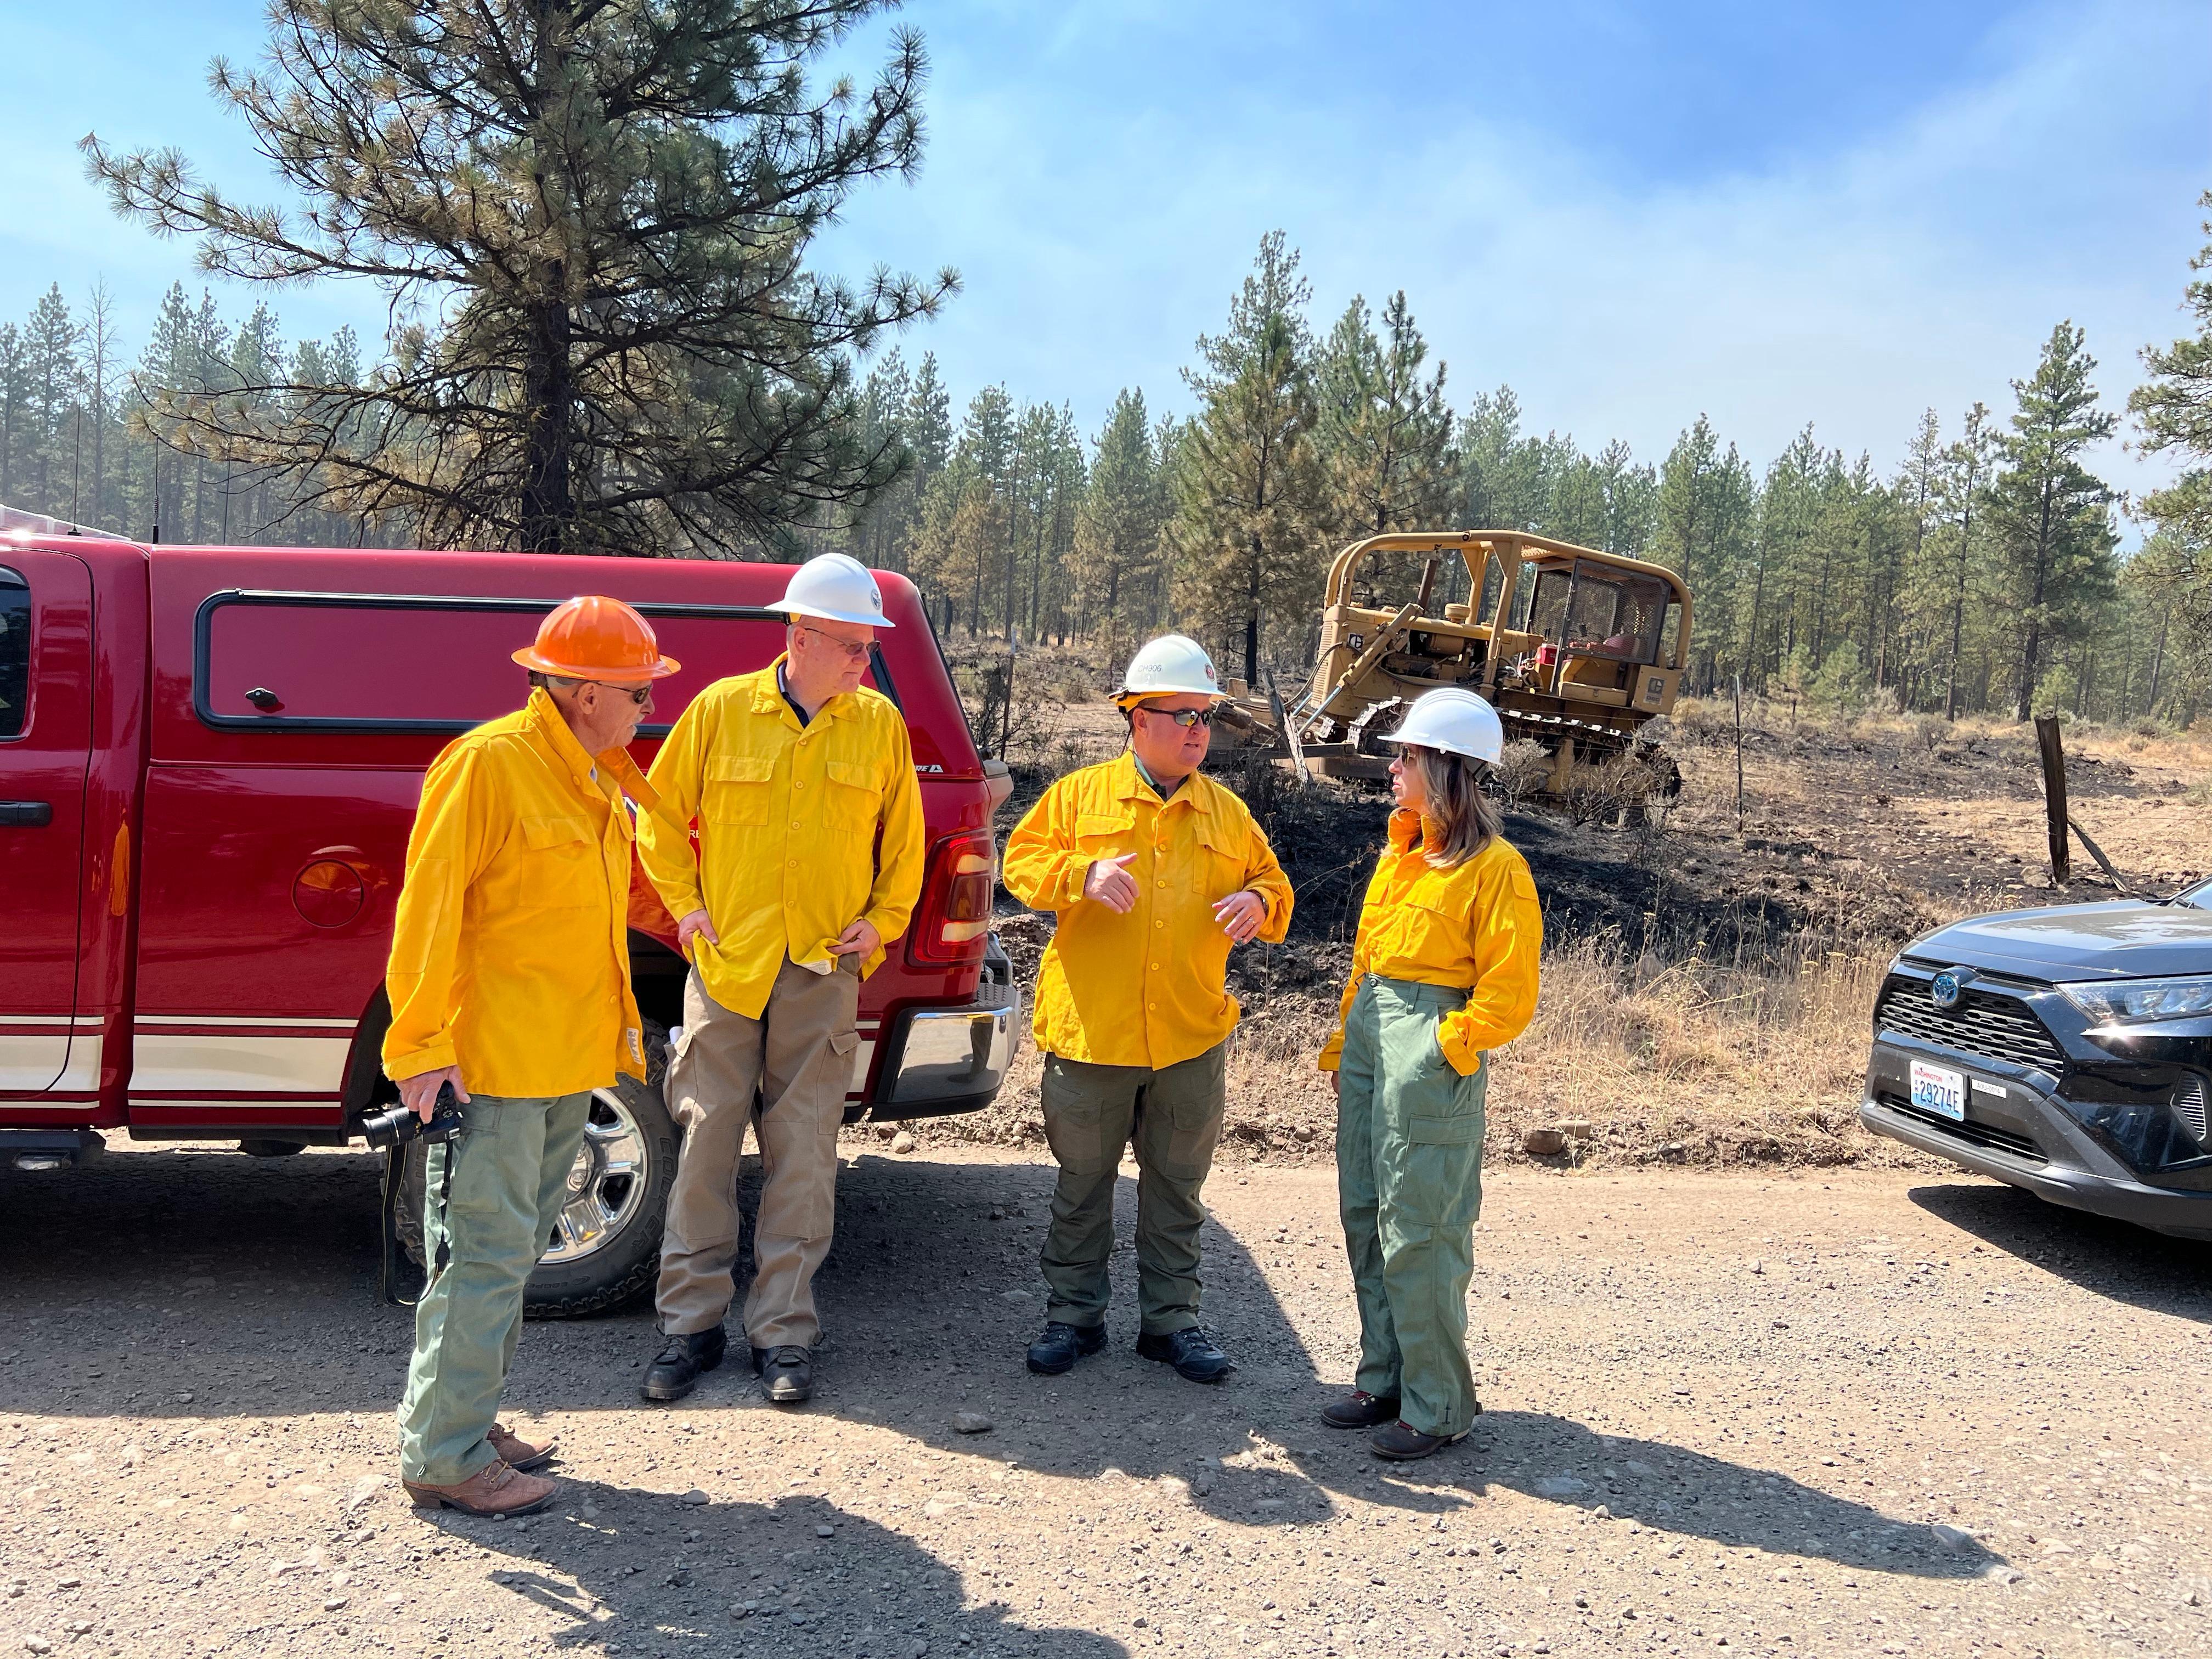 Deputy IC Schindelar escorts Hilary Franz and Tom Dent to the fireline where dozers had been working adjacent to a road. 8/6